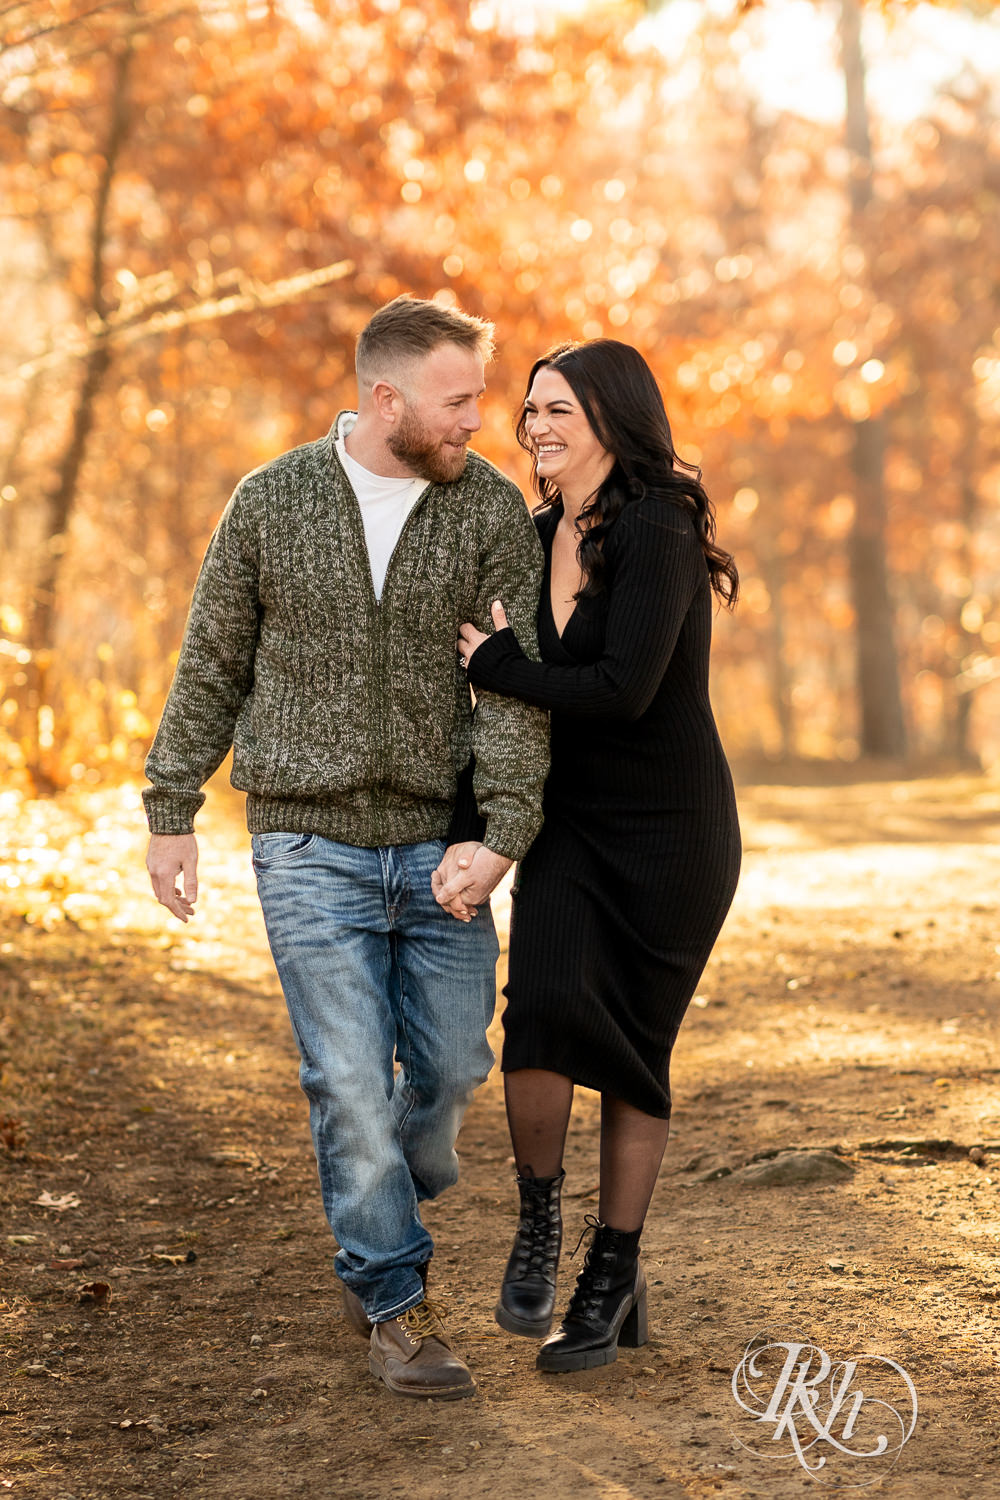 Man in sweater and jeans and woman in black dress walk holding hands at Lebanon Hills Regional Park in Eagan, Minnesota for December morning engagement photography.